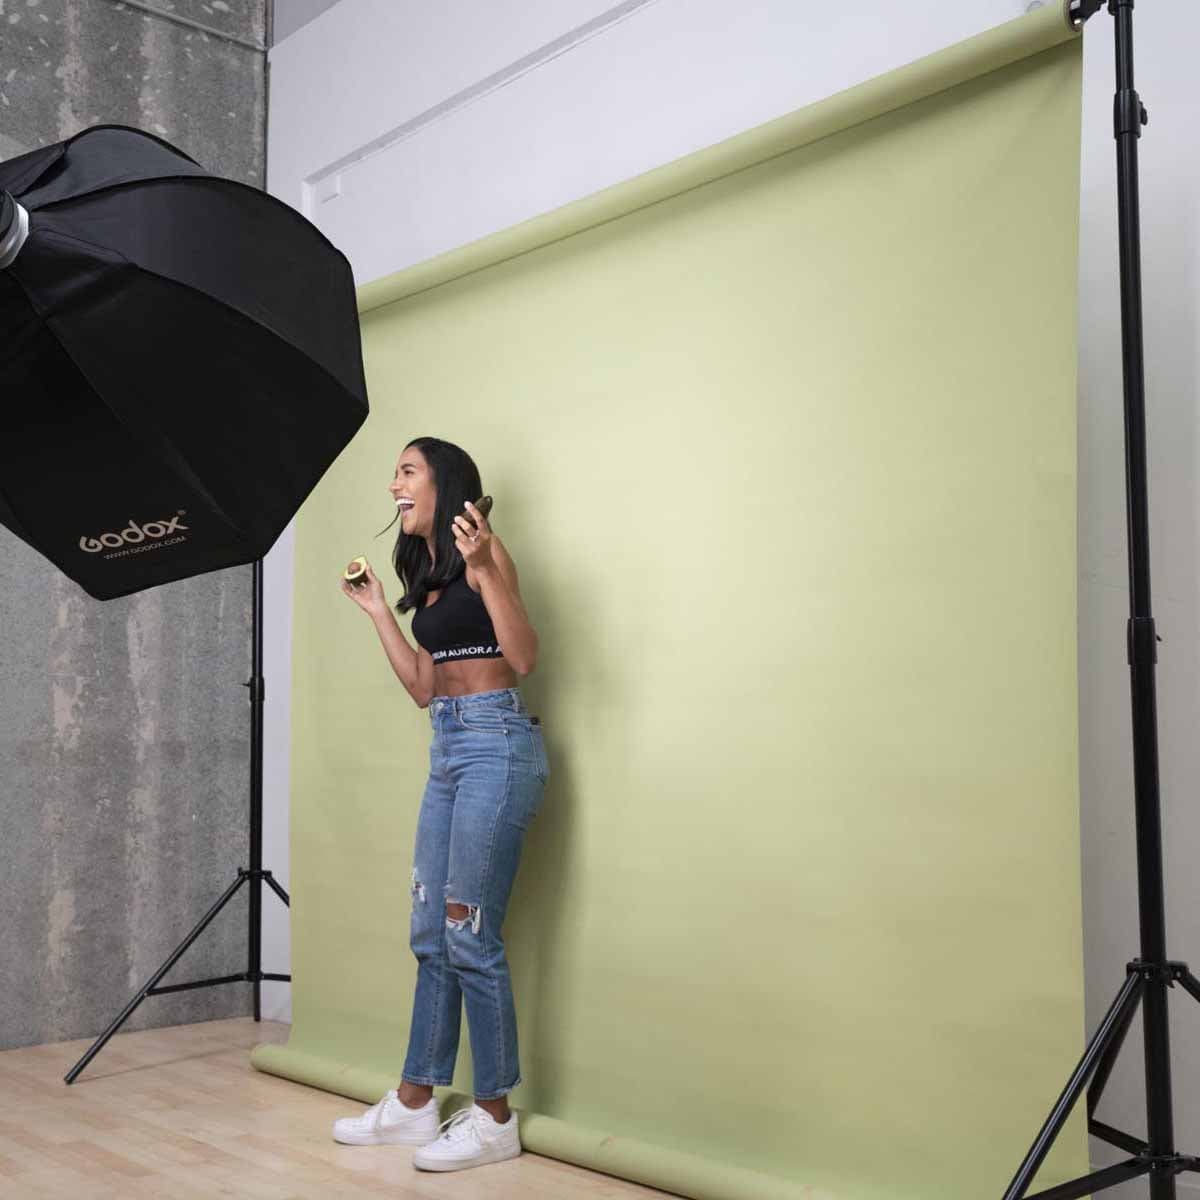 Paper Roll Photography Studio Backdrop Full Length (2.7 x 10M) - Smashed Avocado Green